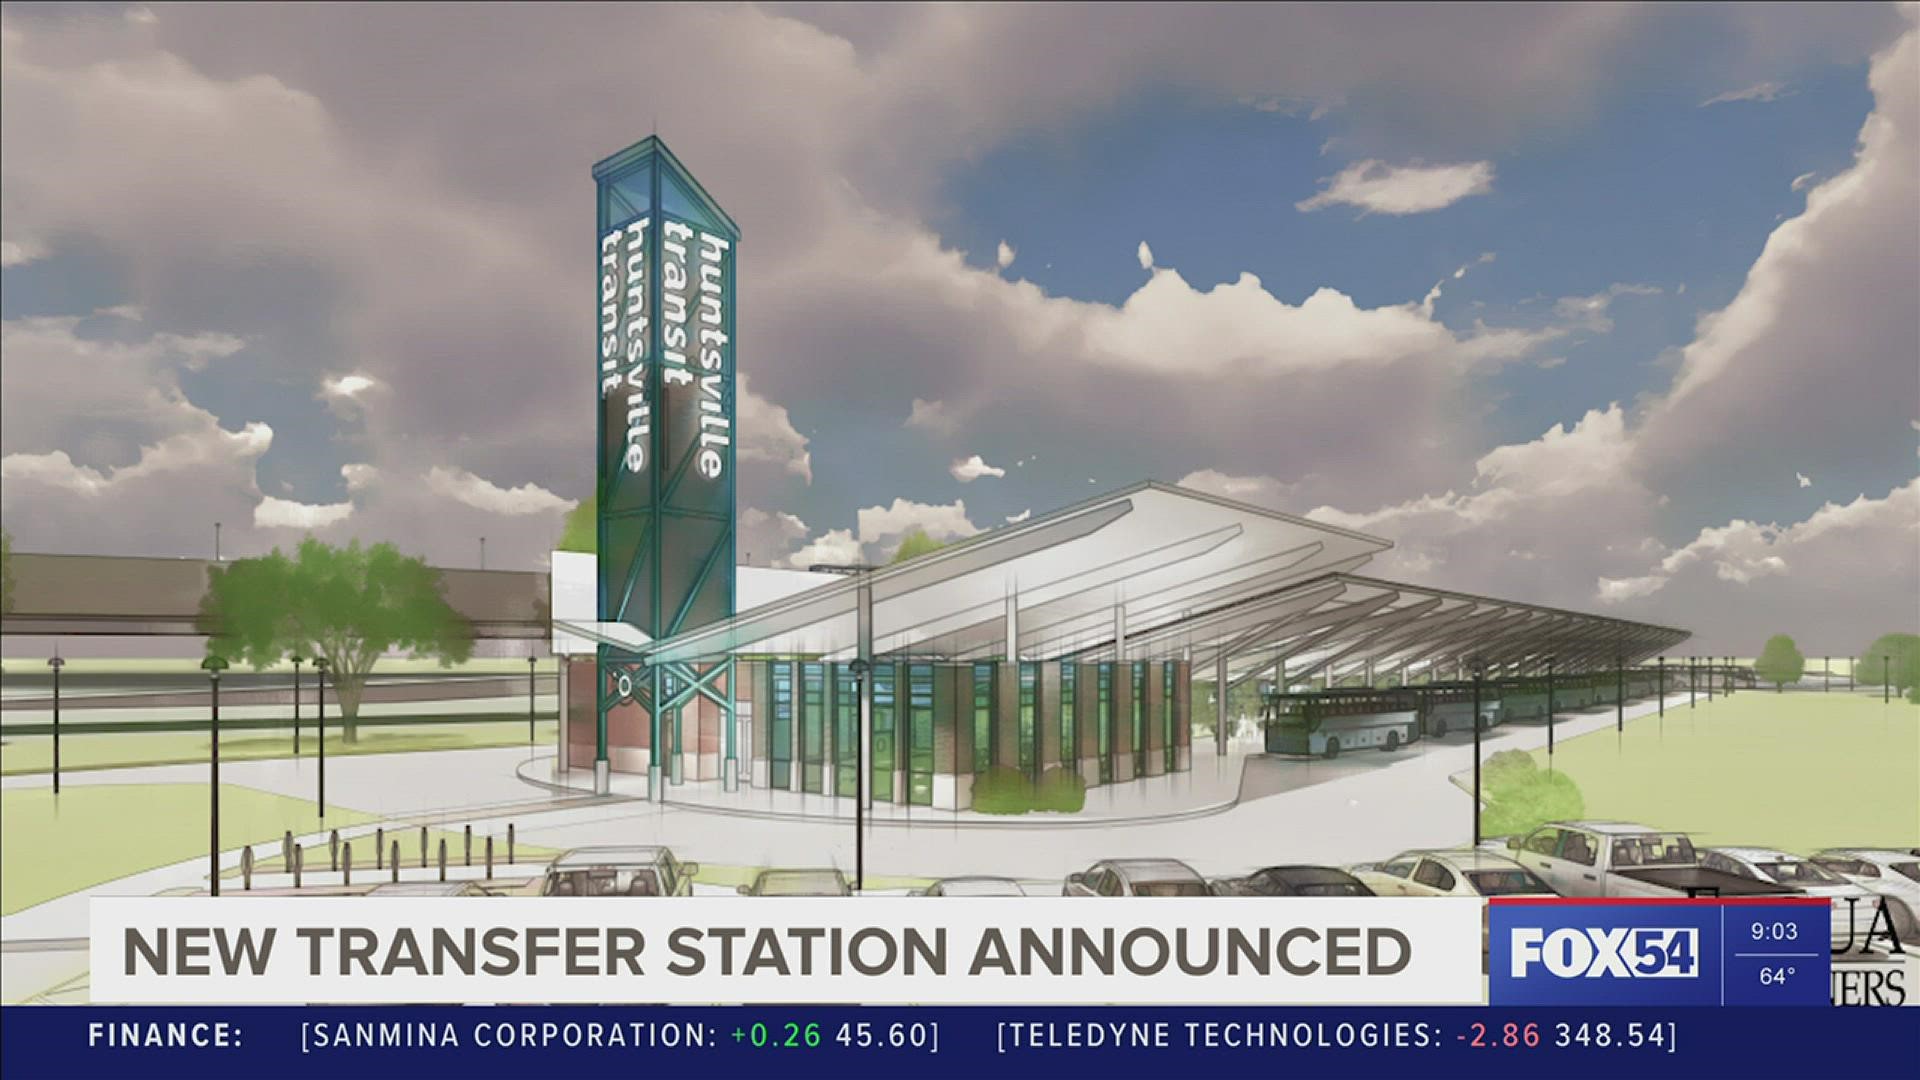 A newly announced transfer station could be the answer to many concerns transit riders have here in Huntsville.